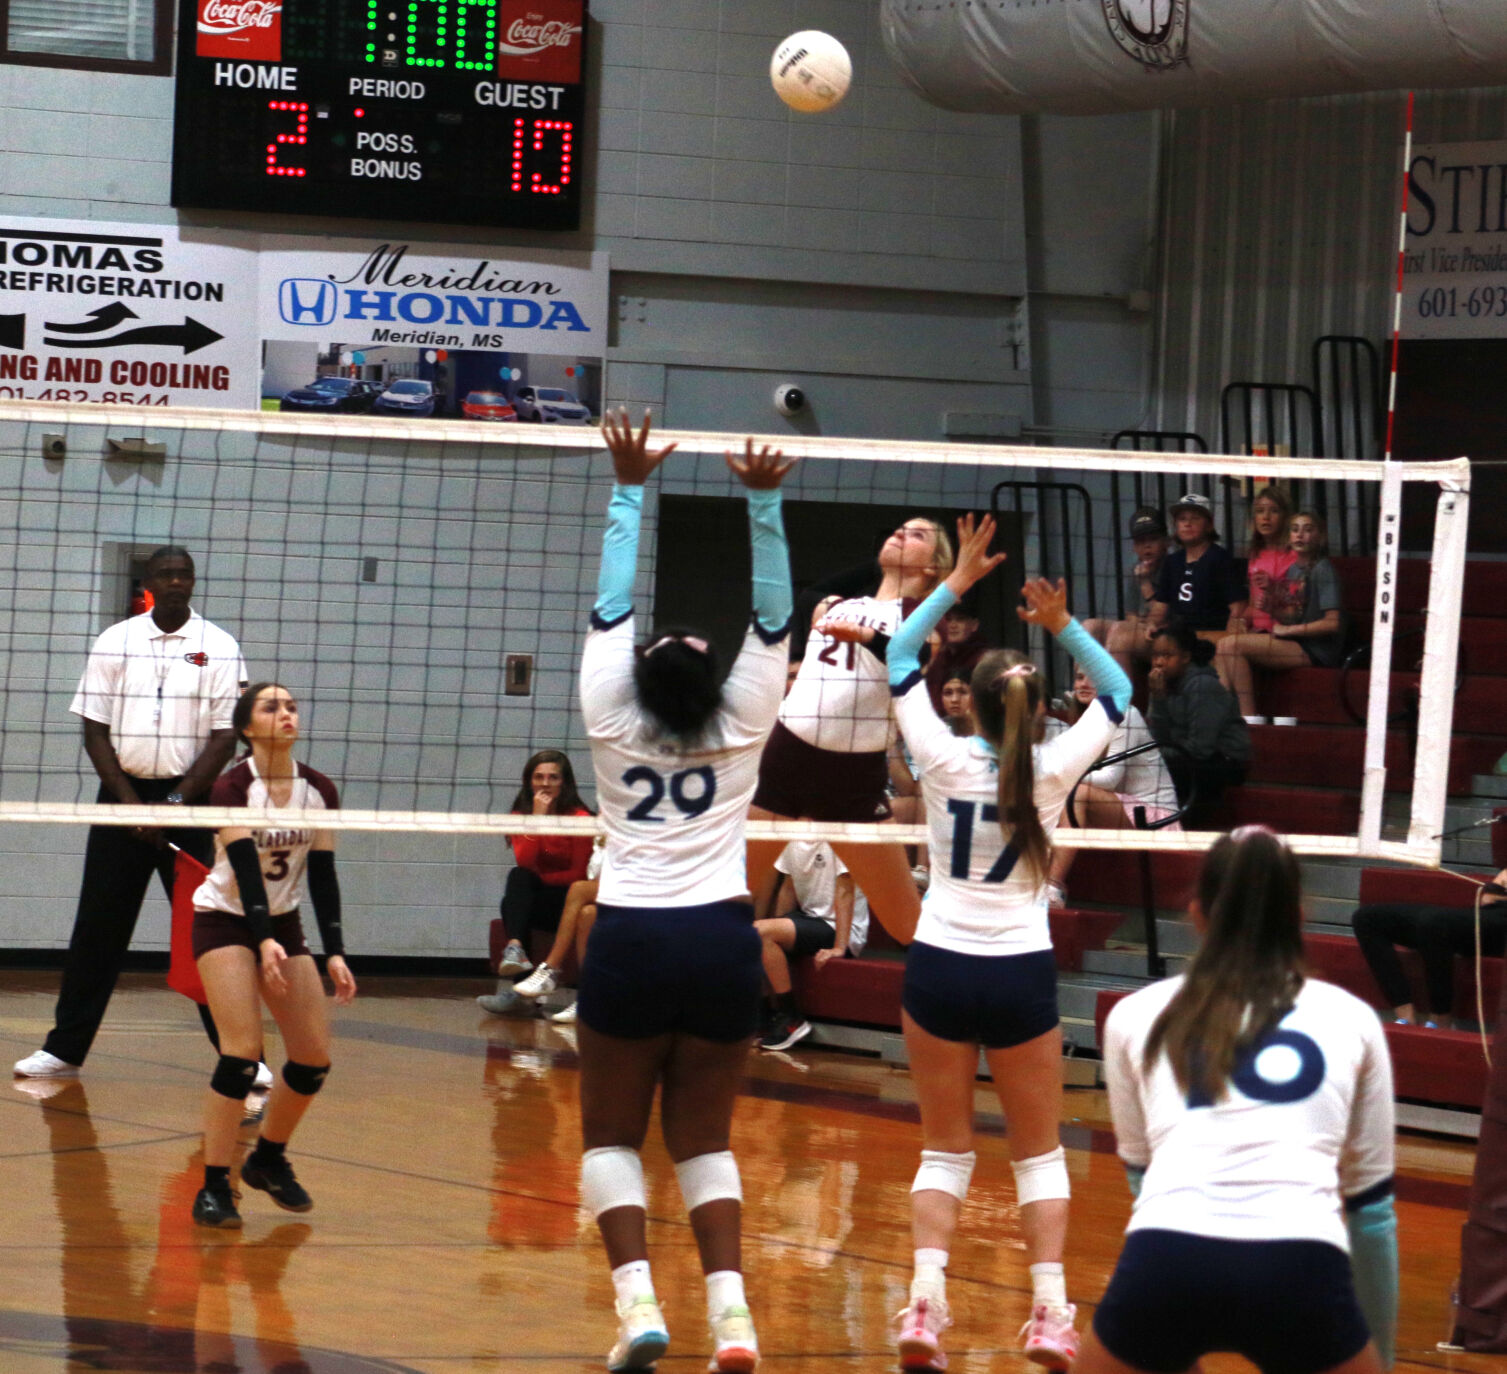 Clarkdale Volleyball Team Shows Grit in Playoff Loss, Coach Optimistic for Future Season